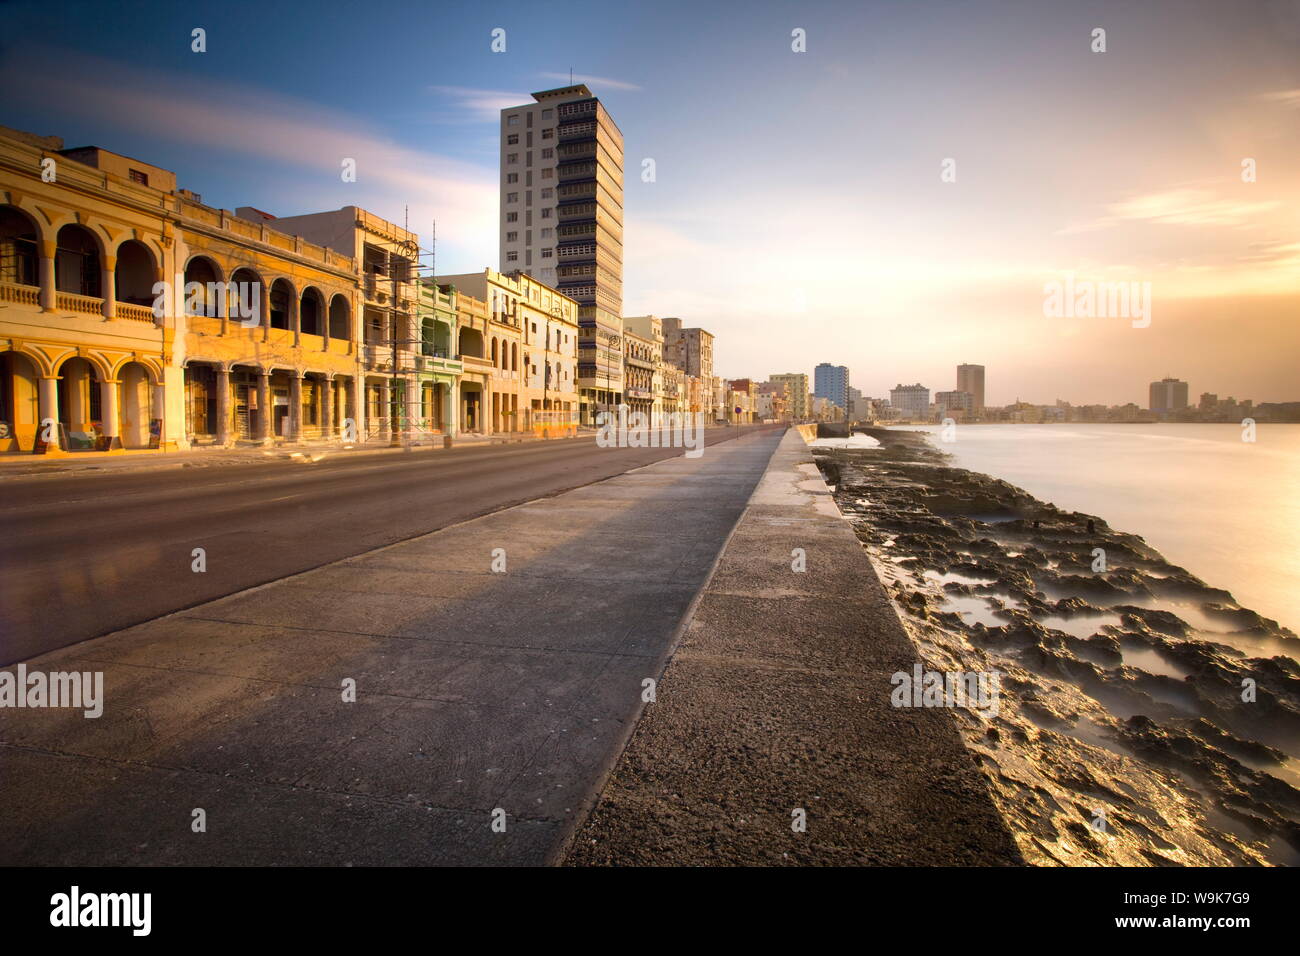 View along The Malecon at dusk showing mix of old and new buildings, Havana, Cuba, West Indies, Central America Stock Photo